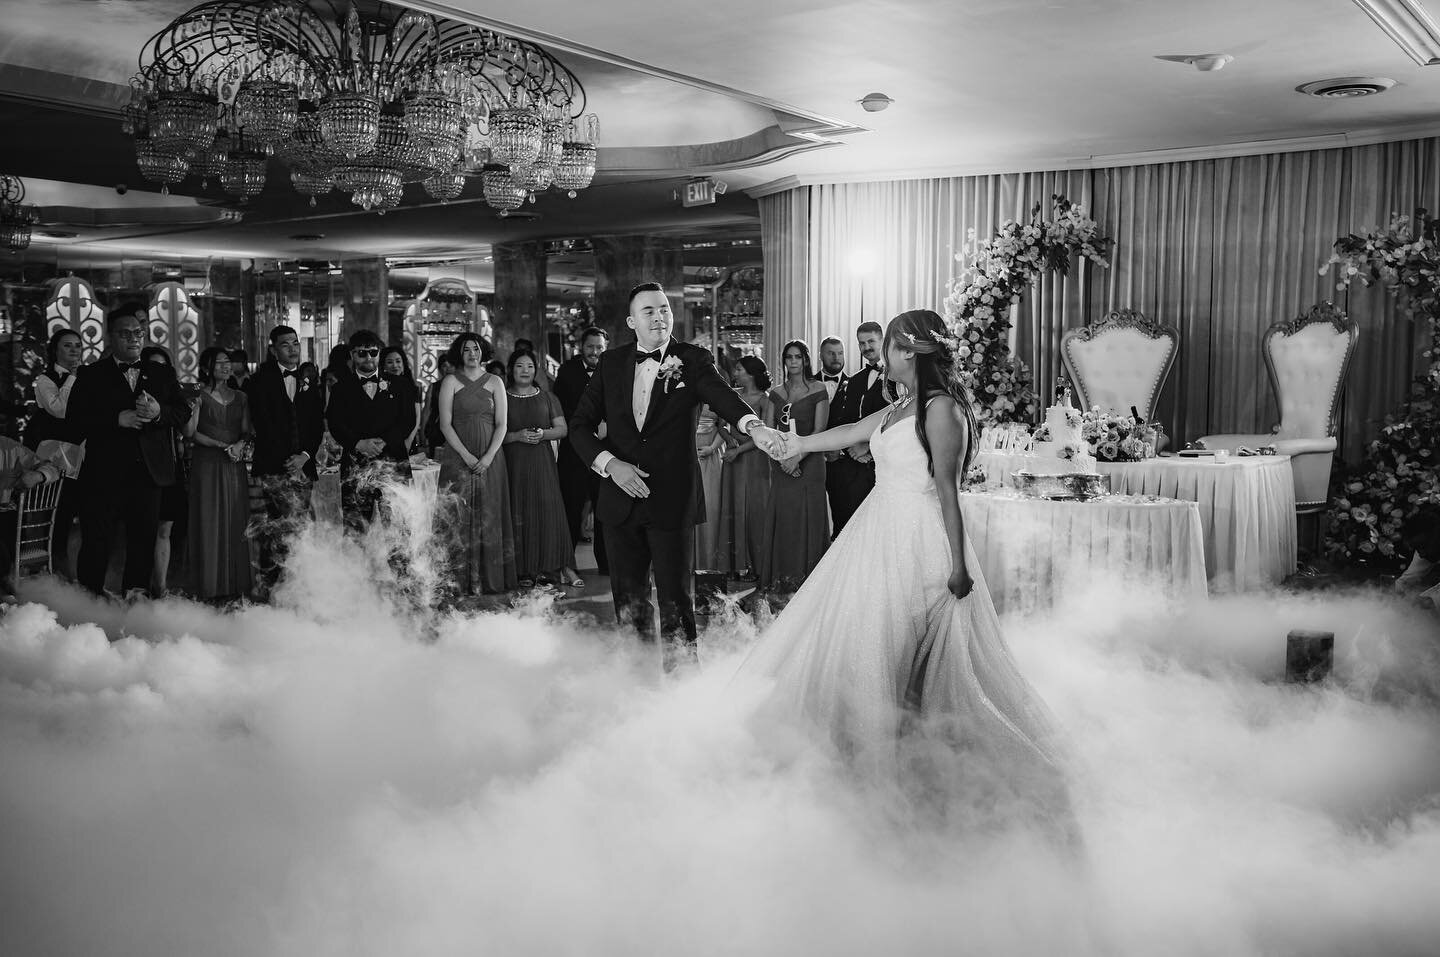 Capturing the enchantment of Nicole and Chad&rsquo;s stunning wedding &ndash; a mesmerizing first dance wrapped in foggy elegance, and the soulful serenade by Chad with John Legend&rsquo;s &lsquo;All of Me.&rsquo; Love and magic in every frame. ✨📸 
